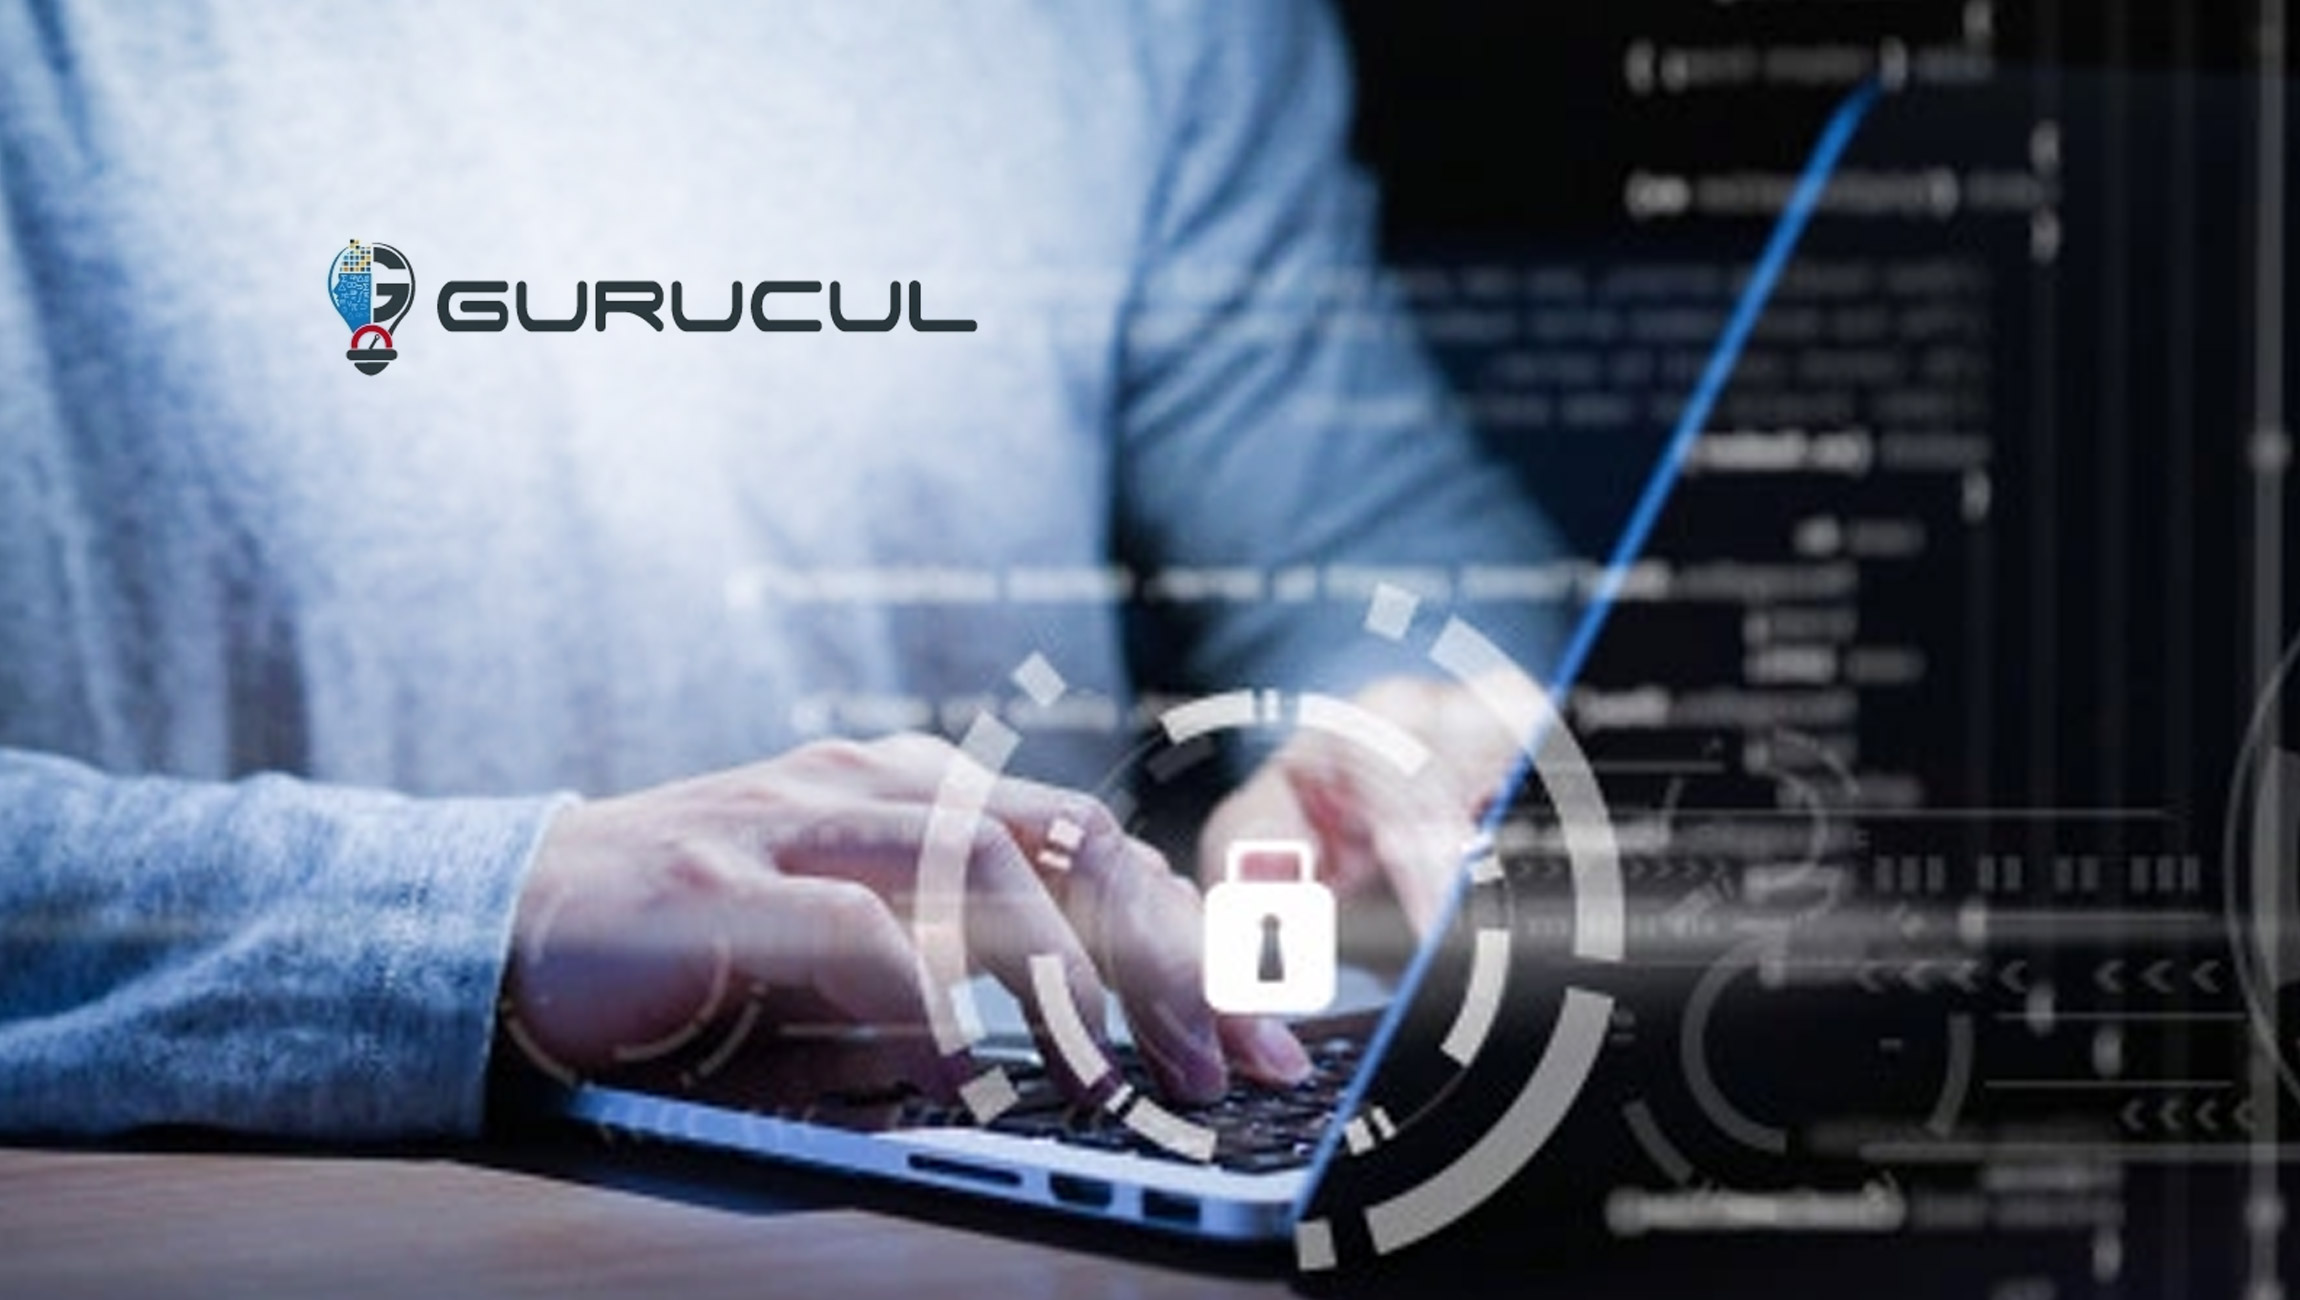 Gurucul Achieves Record Revenue Growth, Customer and Partner Expansion, as Company Momentum Continues Through 2021